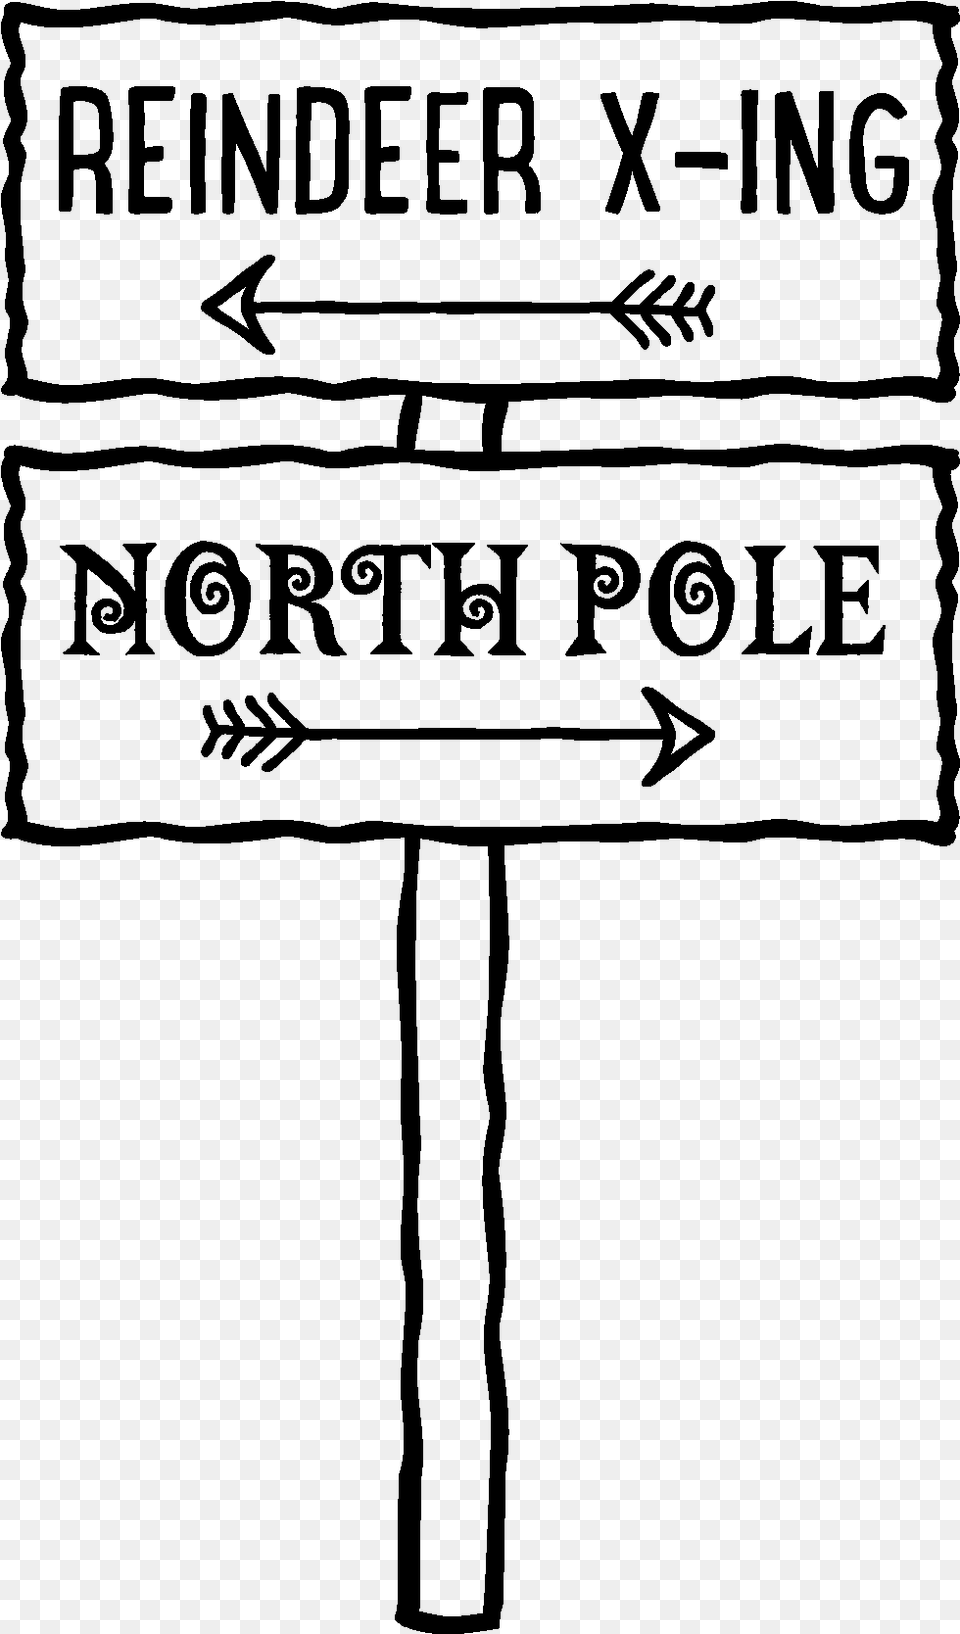 Reindeer X Ing Northpole Sign Sign, Gray Free Png